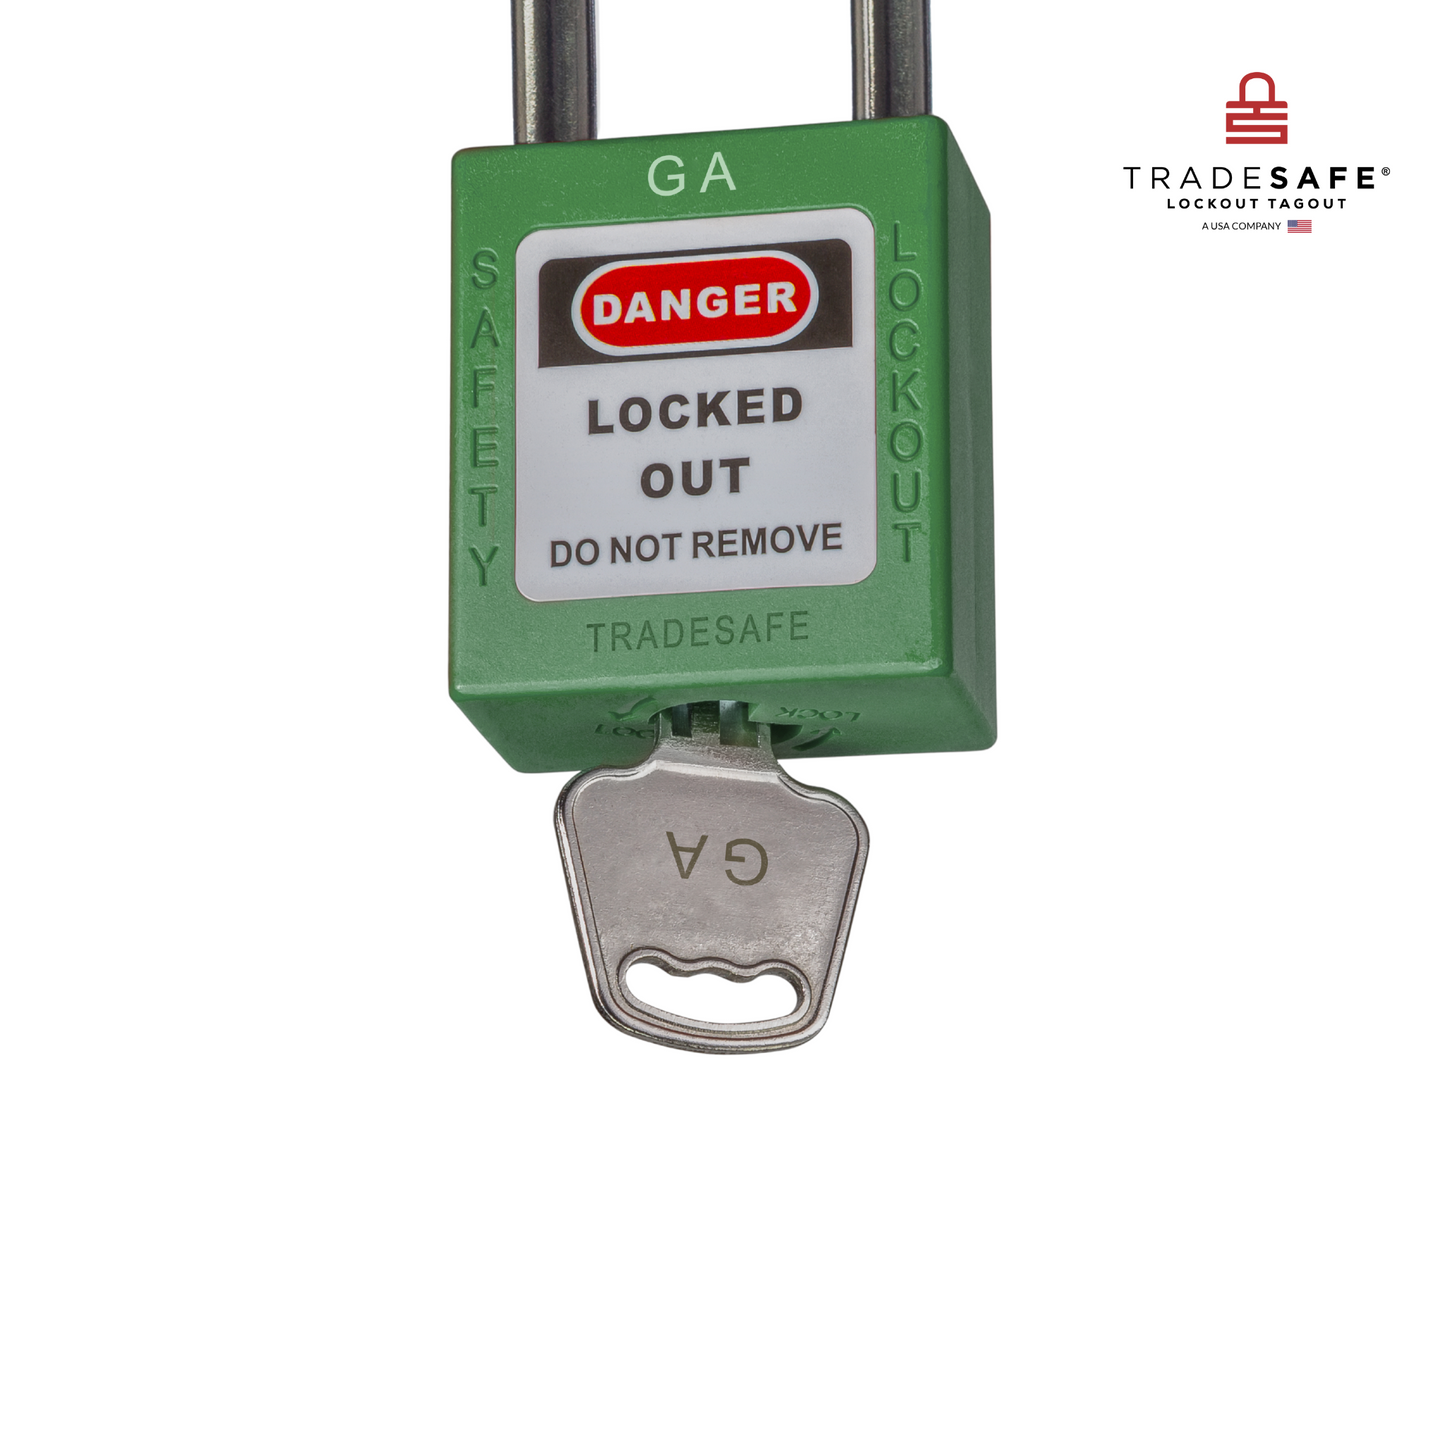 a close-up view of a green loto padlock's body with a key inserted  